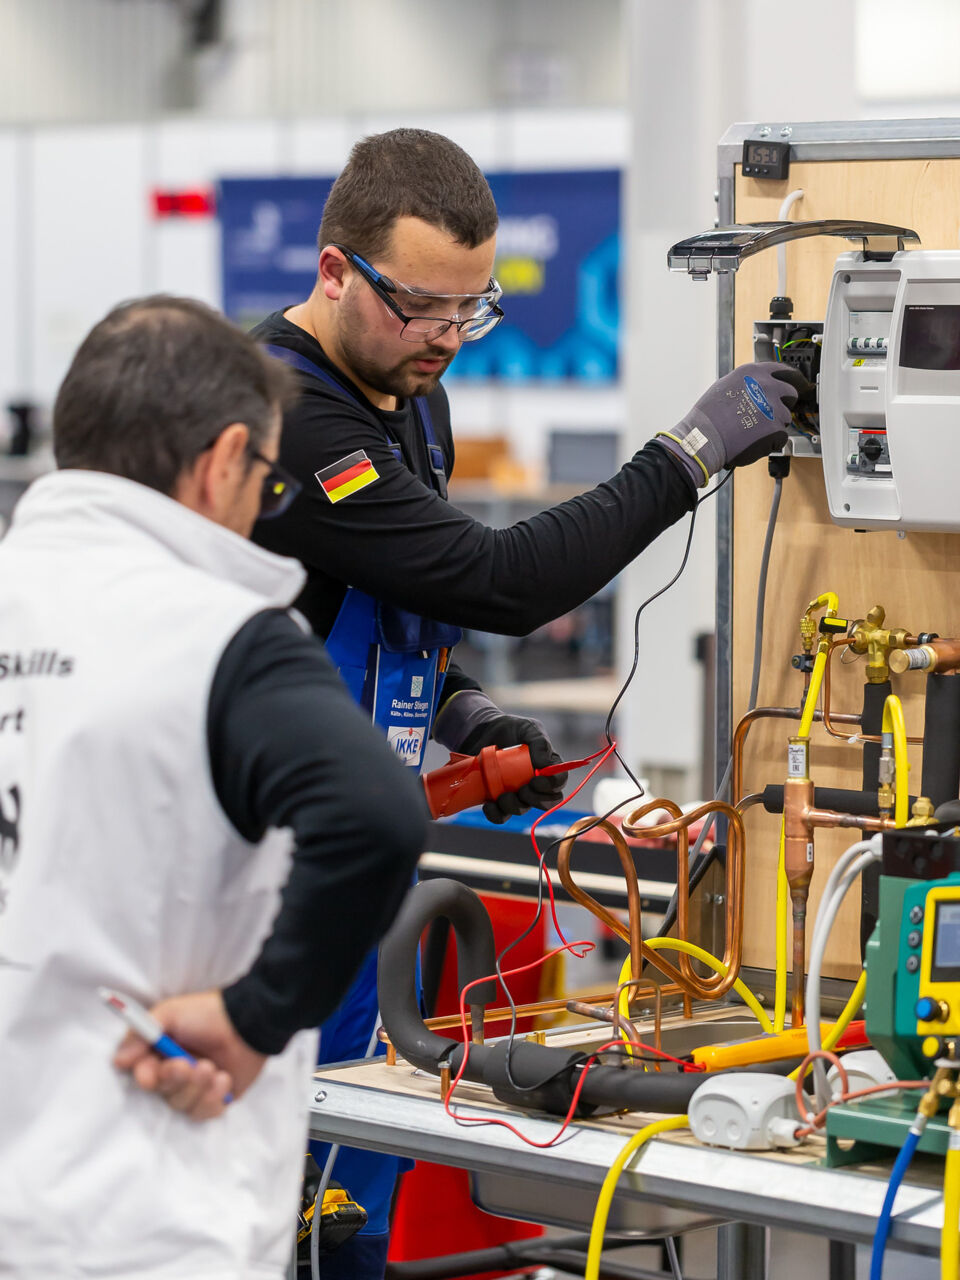 A Refrigeration and Air Conditioning Competitor from Germany testing electrical equipment in Nuremberg, Germany as part of WorldSkills Competition 2022 Special Edition.